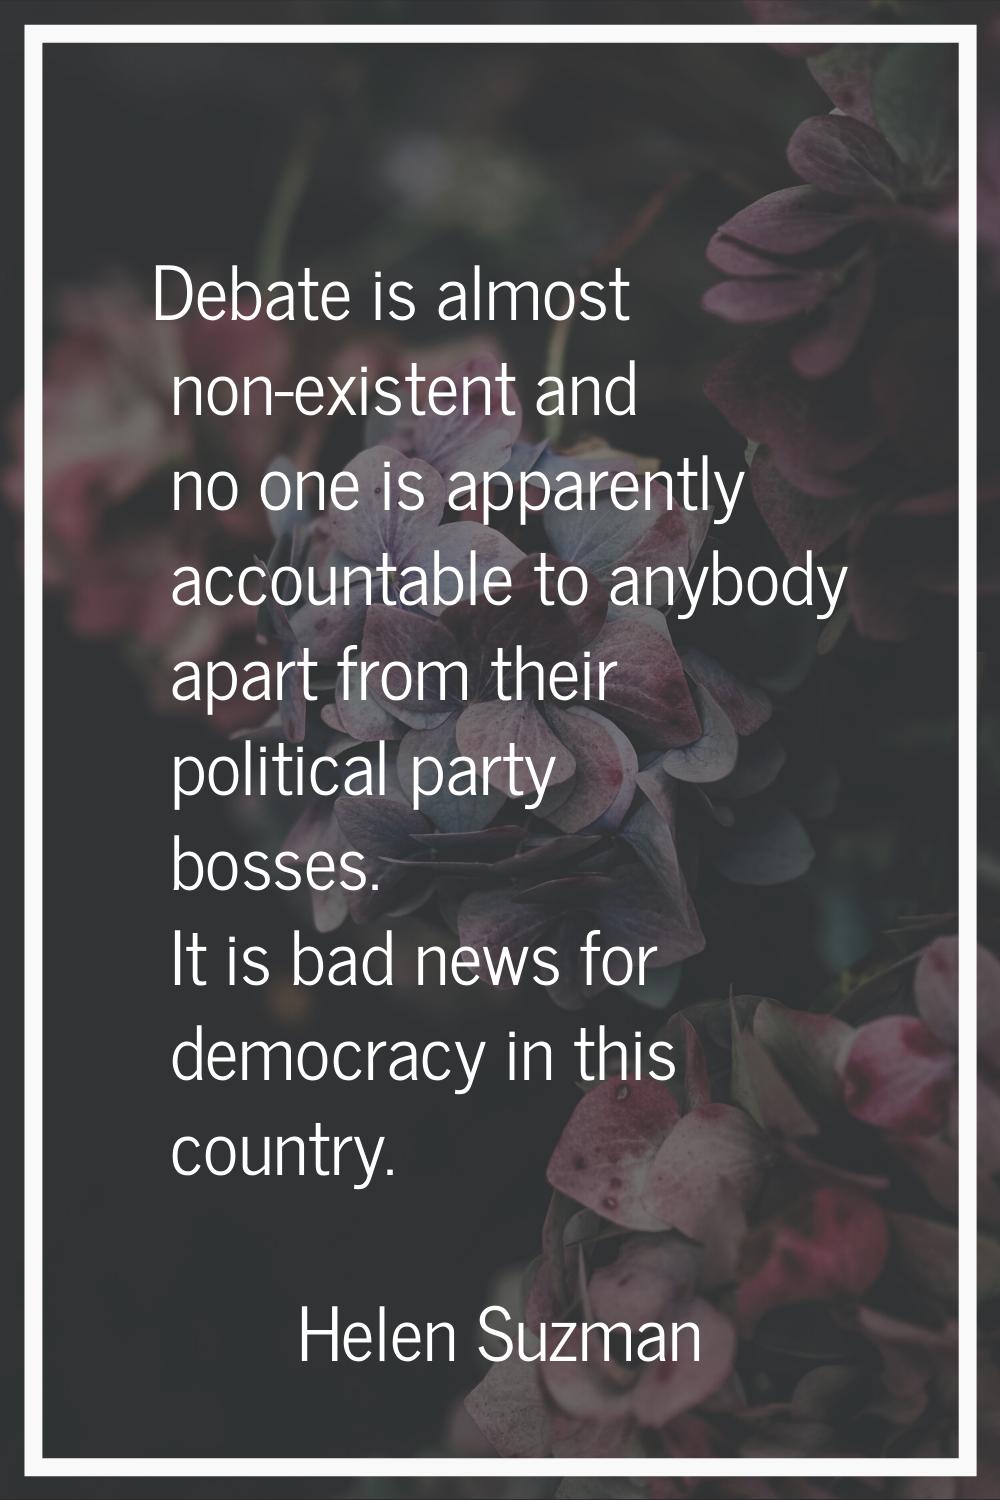 Debate is almost non-existent and no one is apparently accountable to anybody apart from their poli